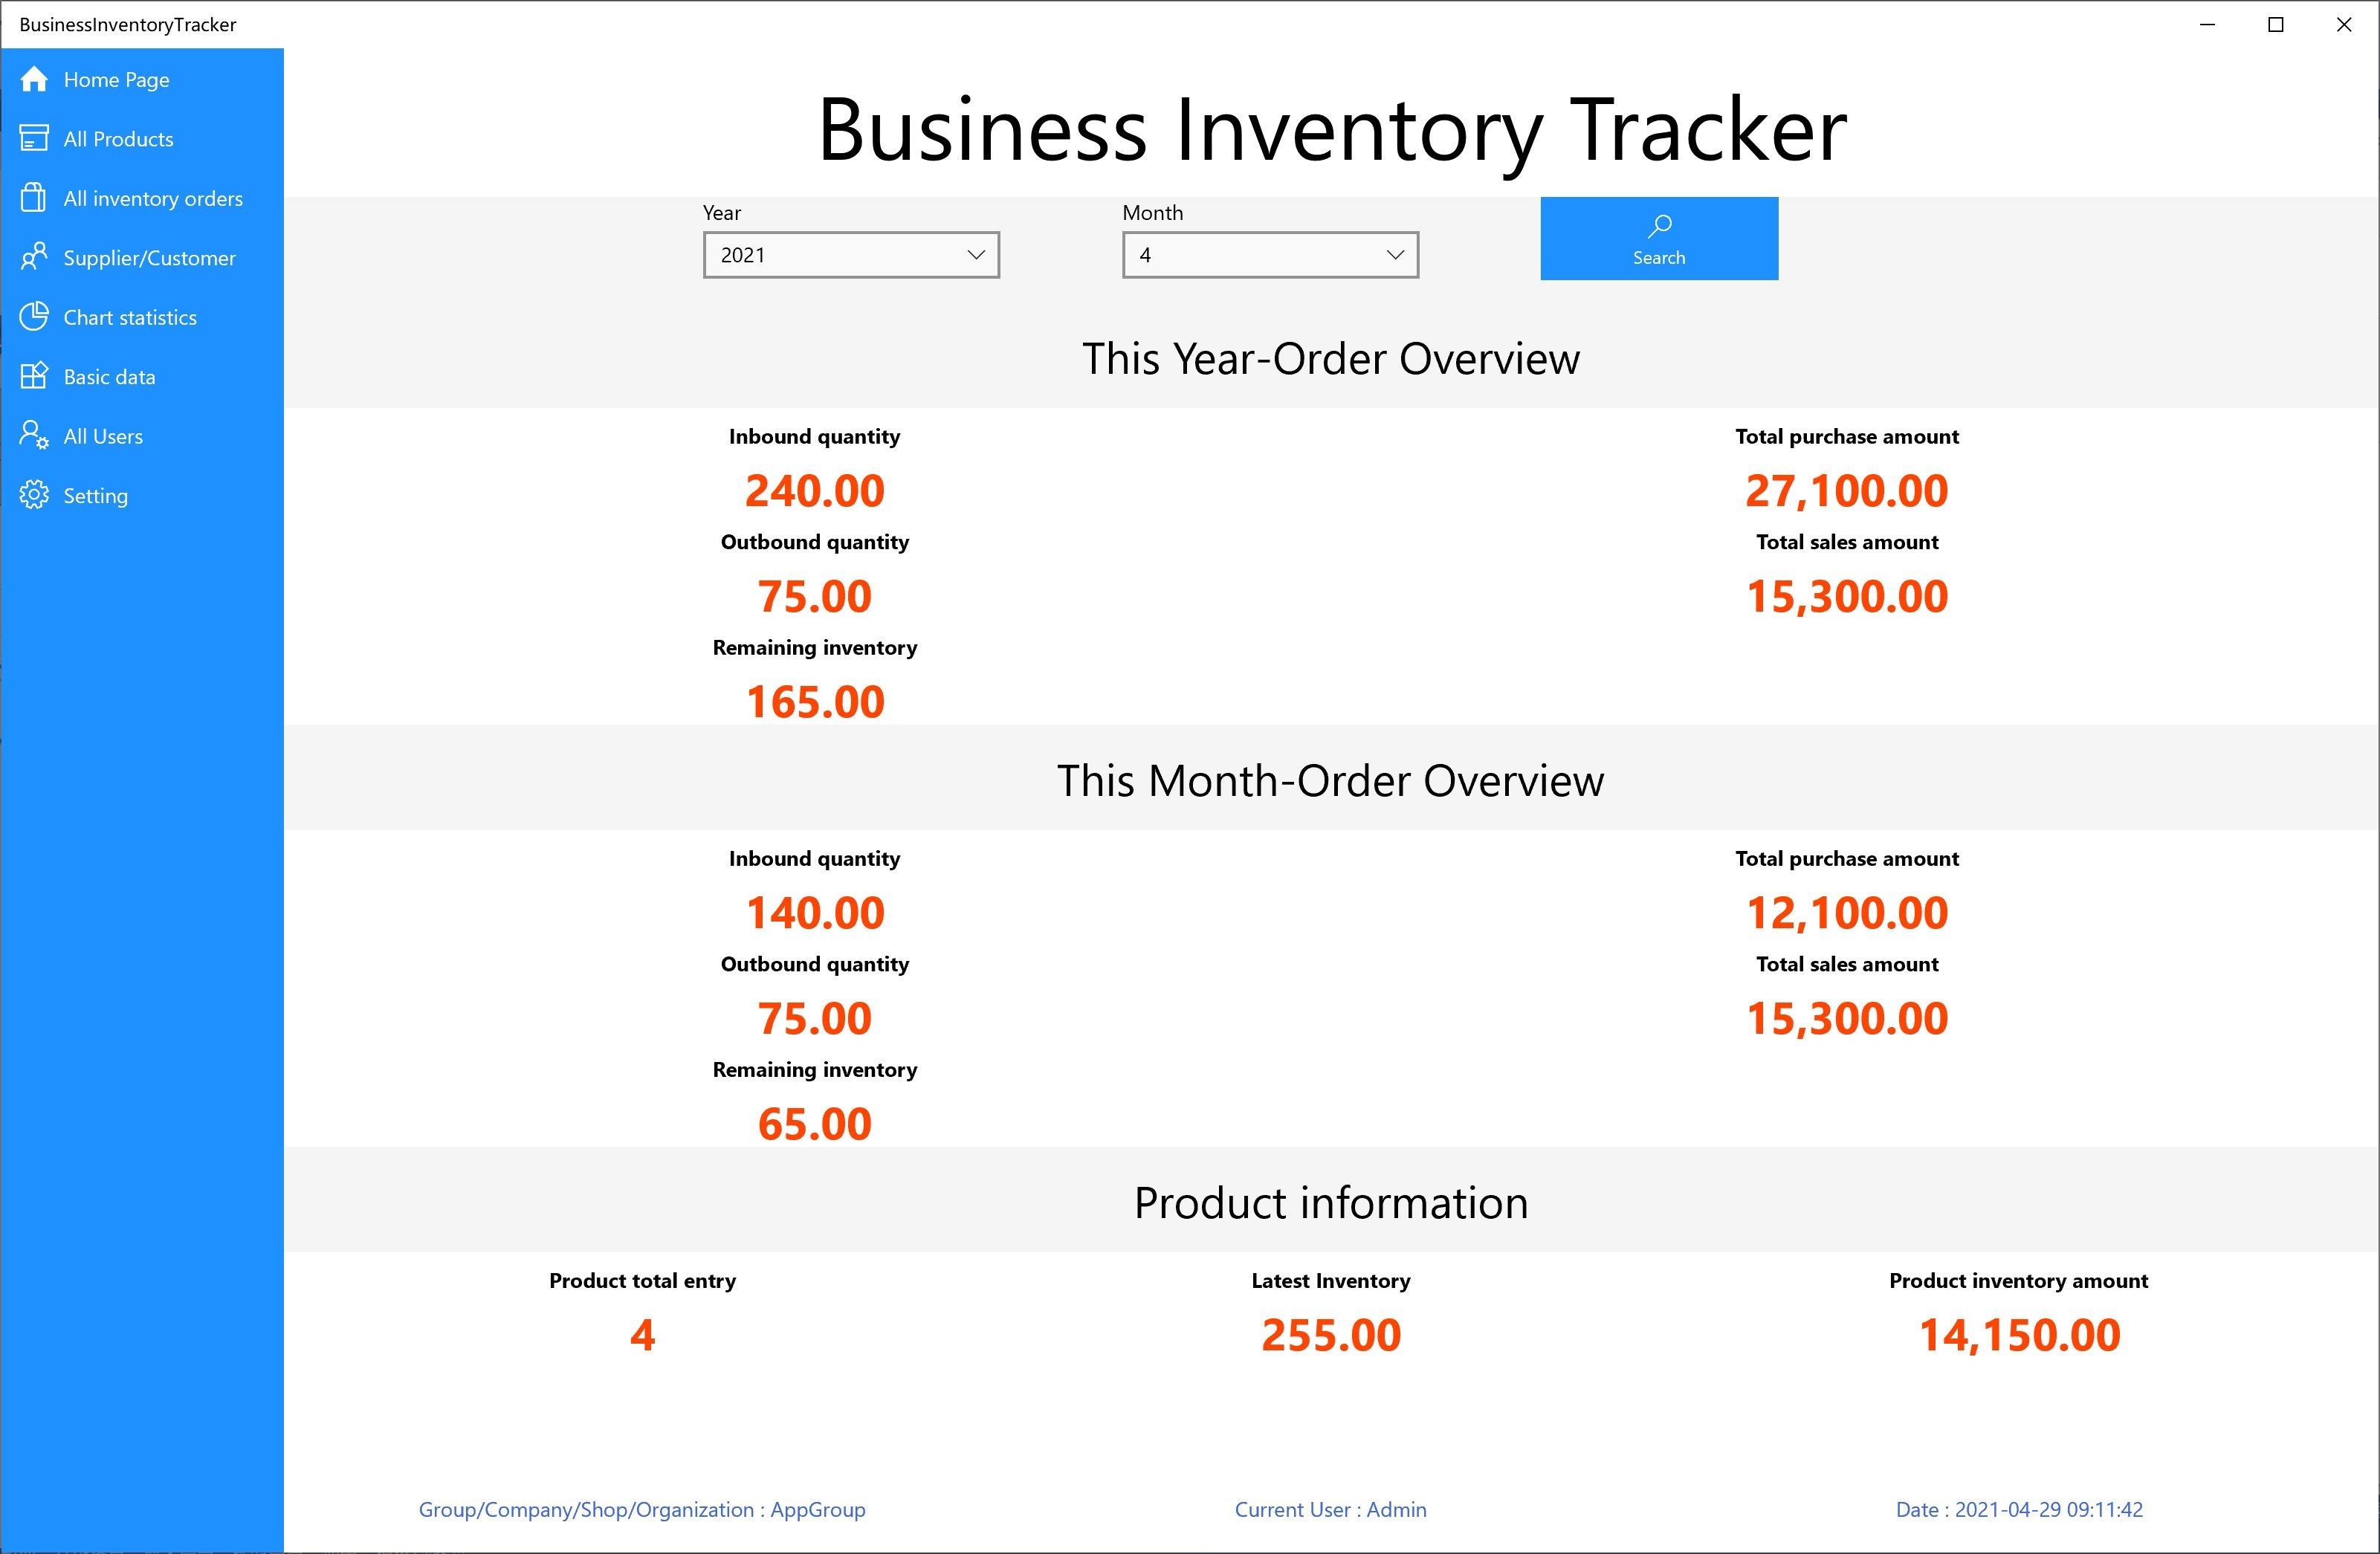 Business Inventory Tracker - Product Inventory Management